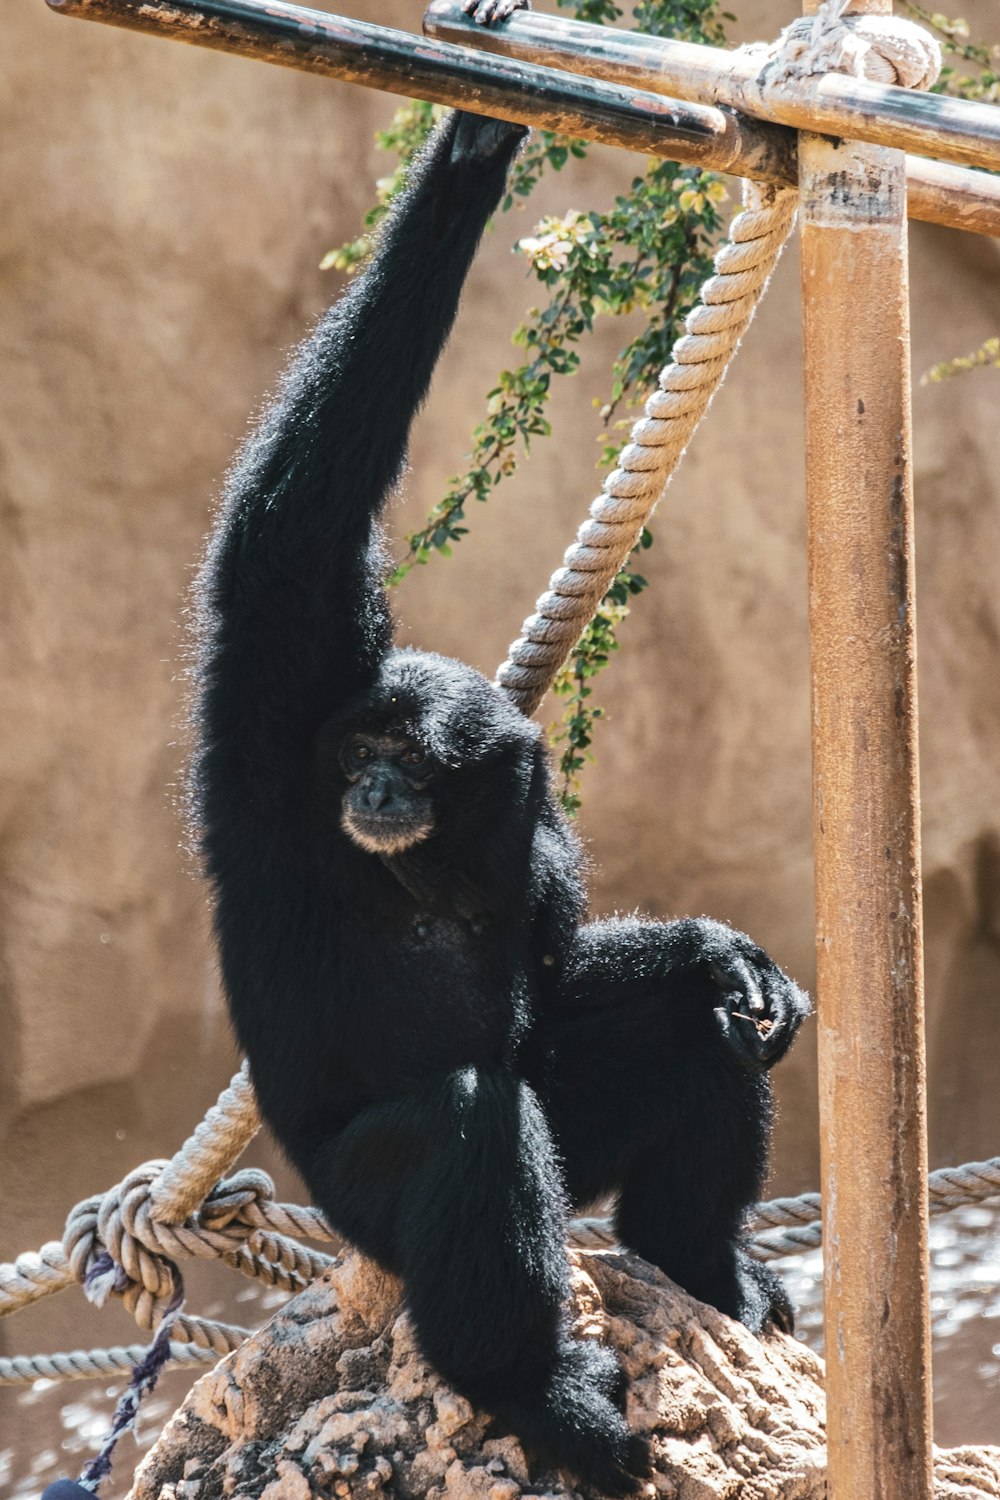 a baby gorilla hanging from a rope in a zoo